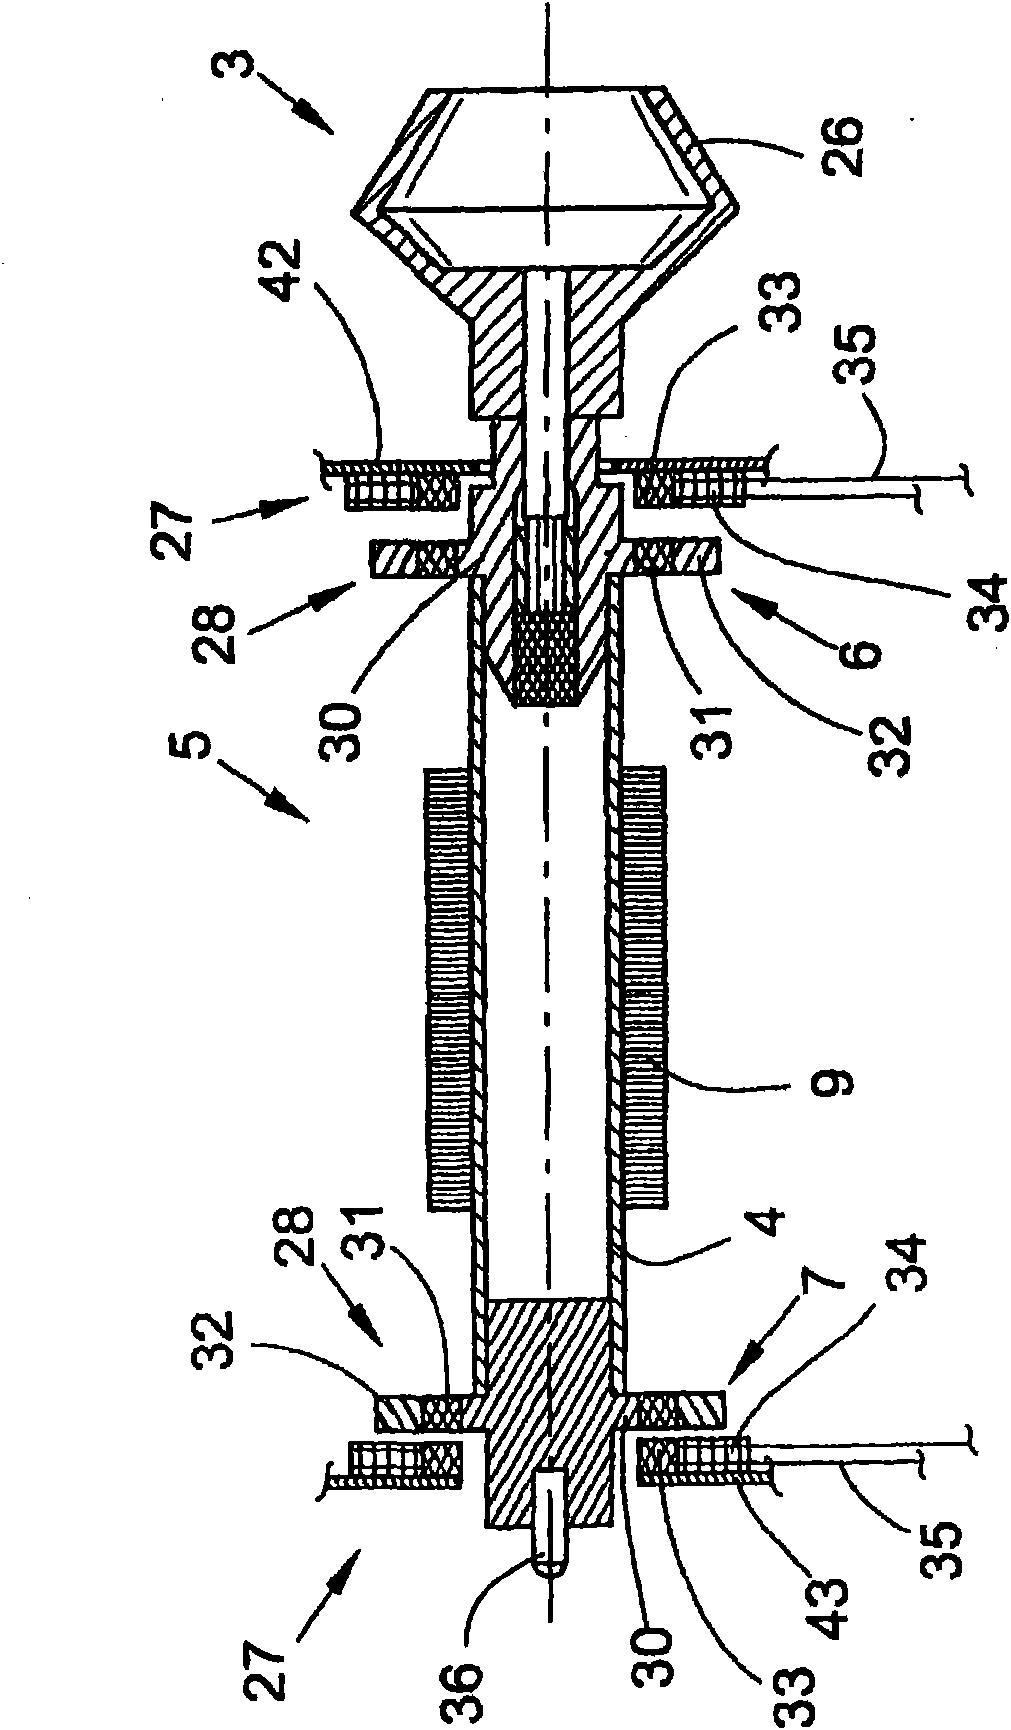 Rotor drive of an open-ended spinning apparatus